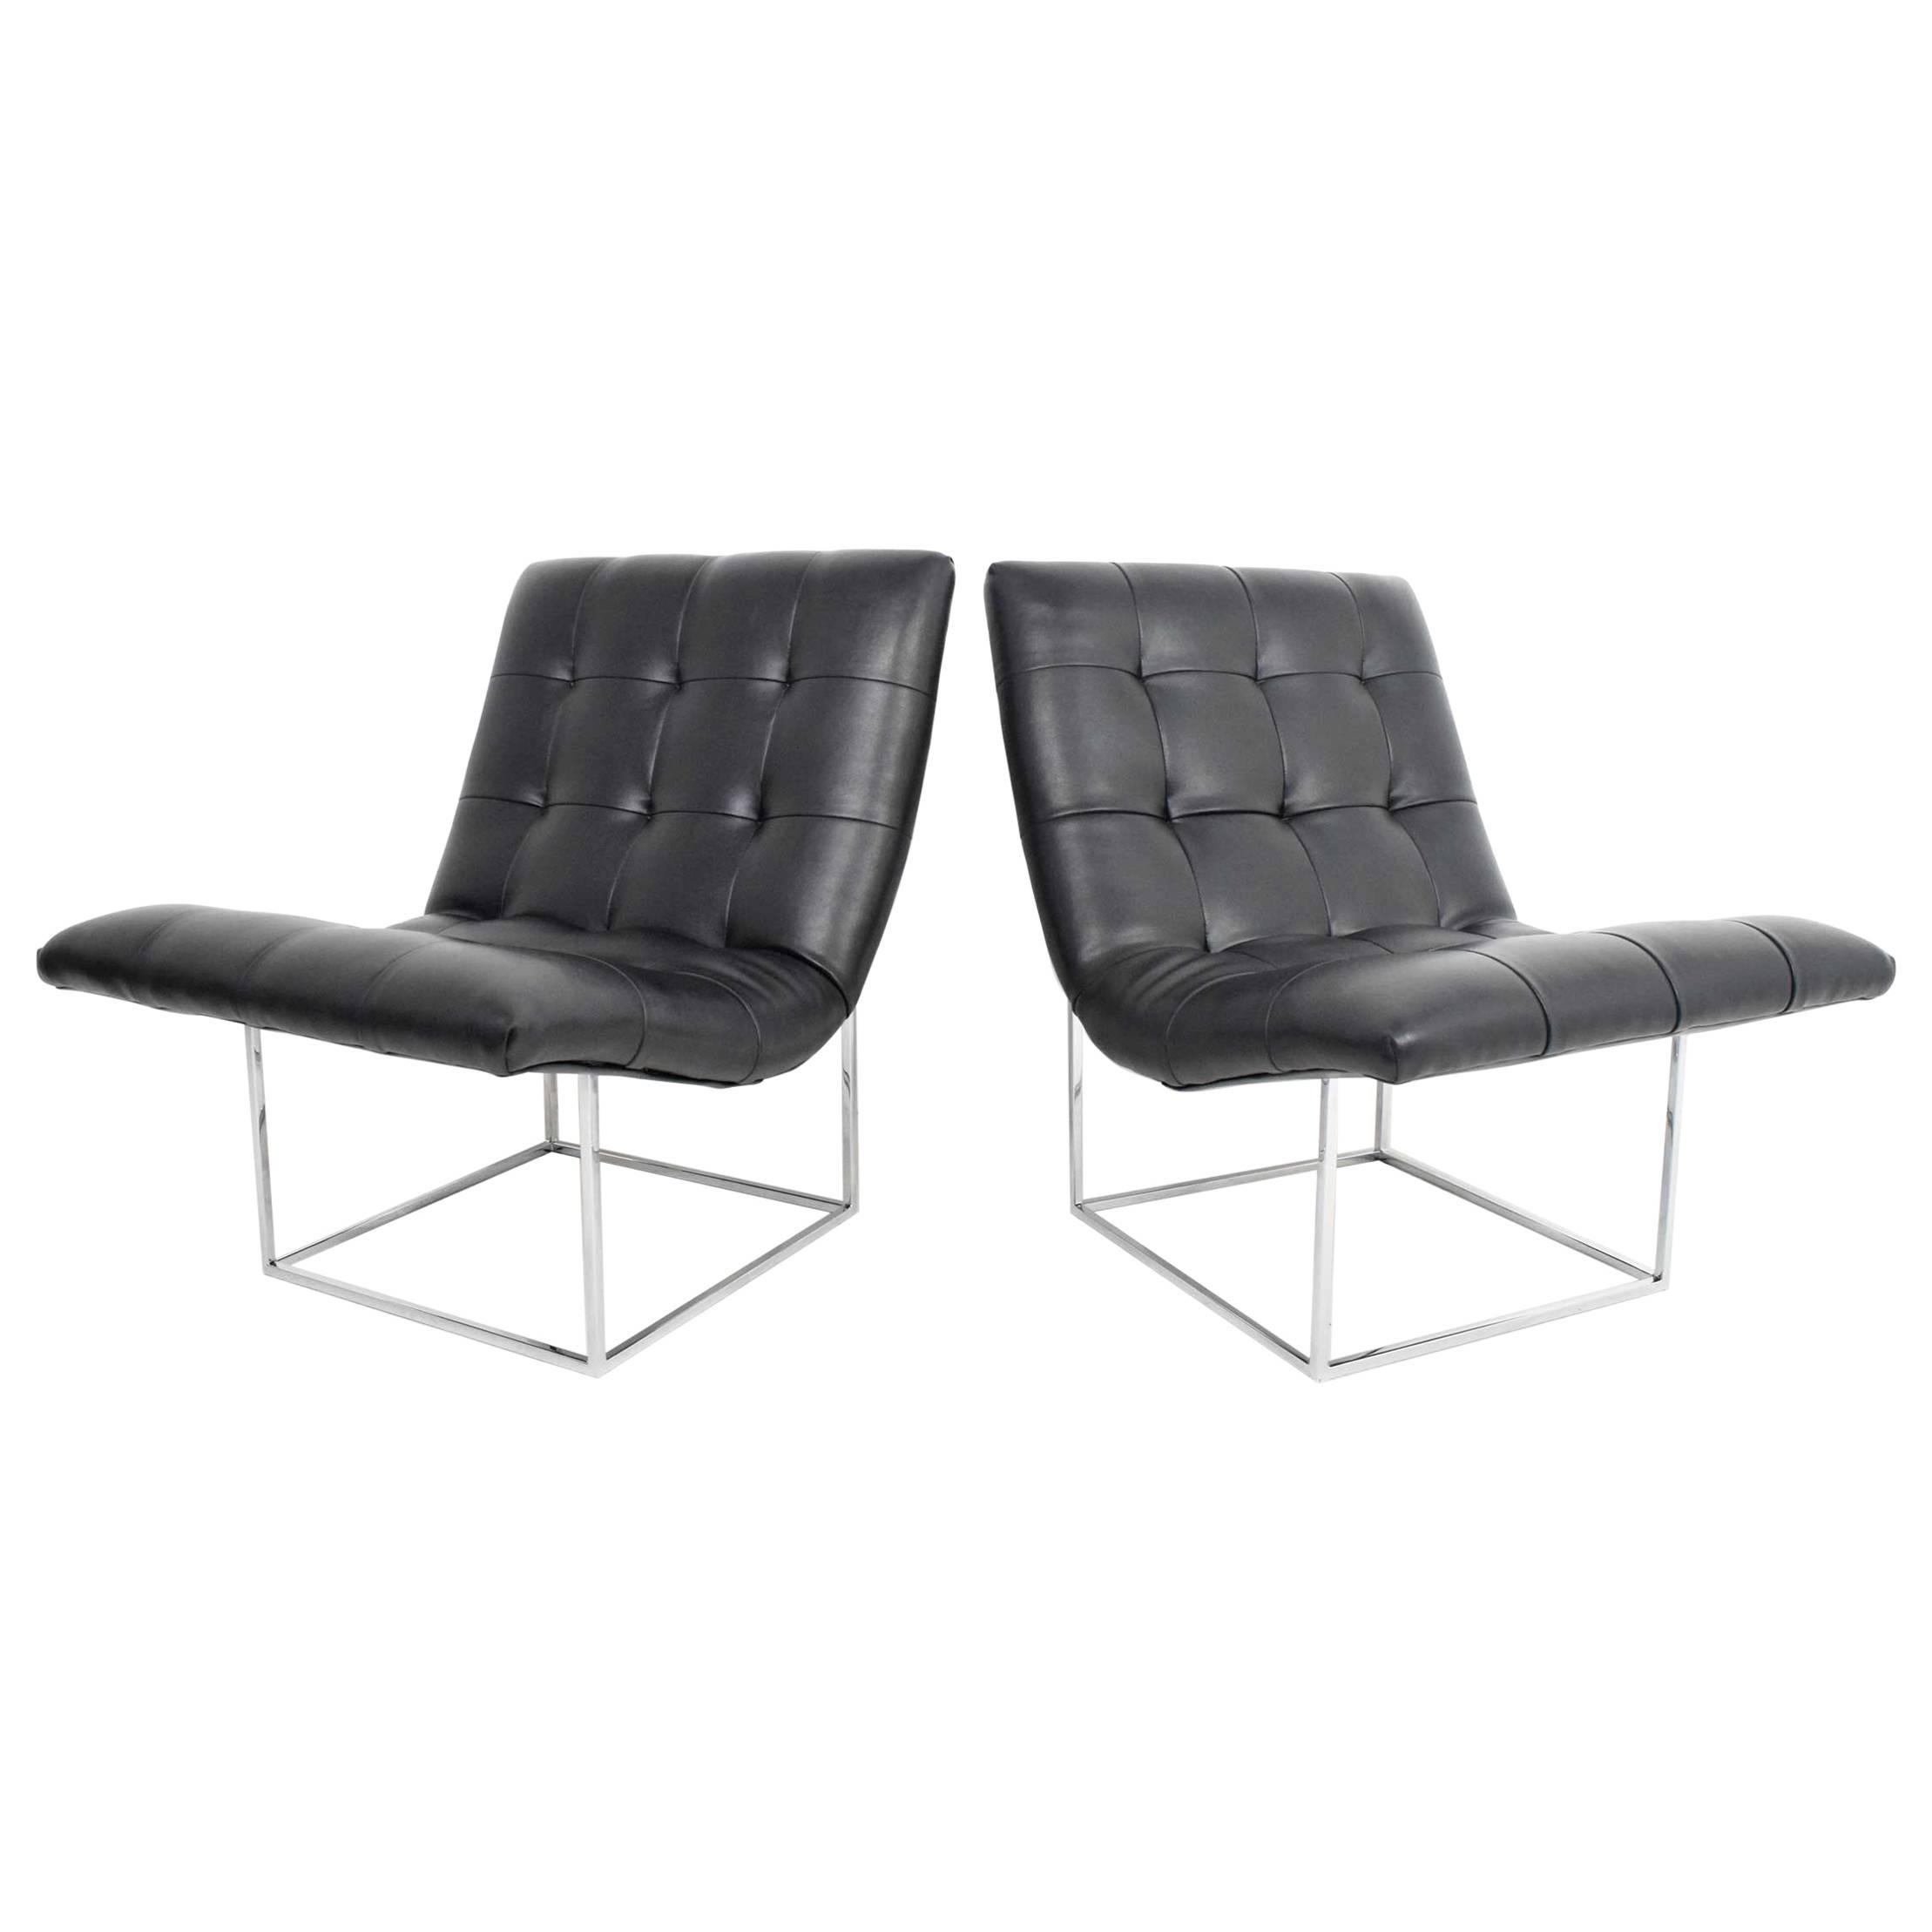 Pair of Milo Baughman for Thayer Coggin Lounge Chairs